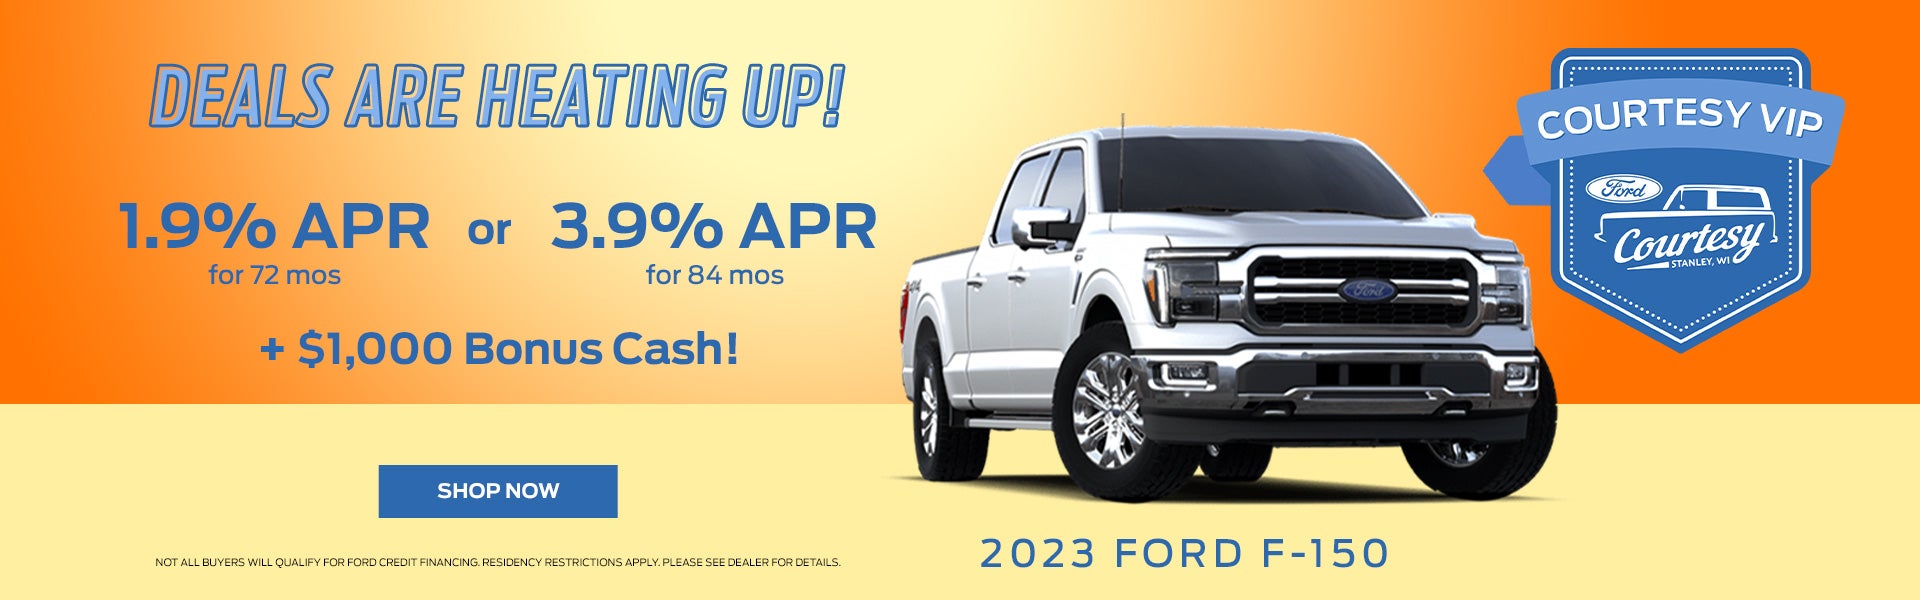 2023 F-150 1.9% APR for 72 mos or 3.9% APR for 84 mos